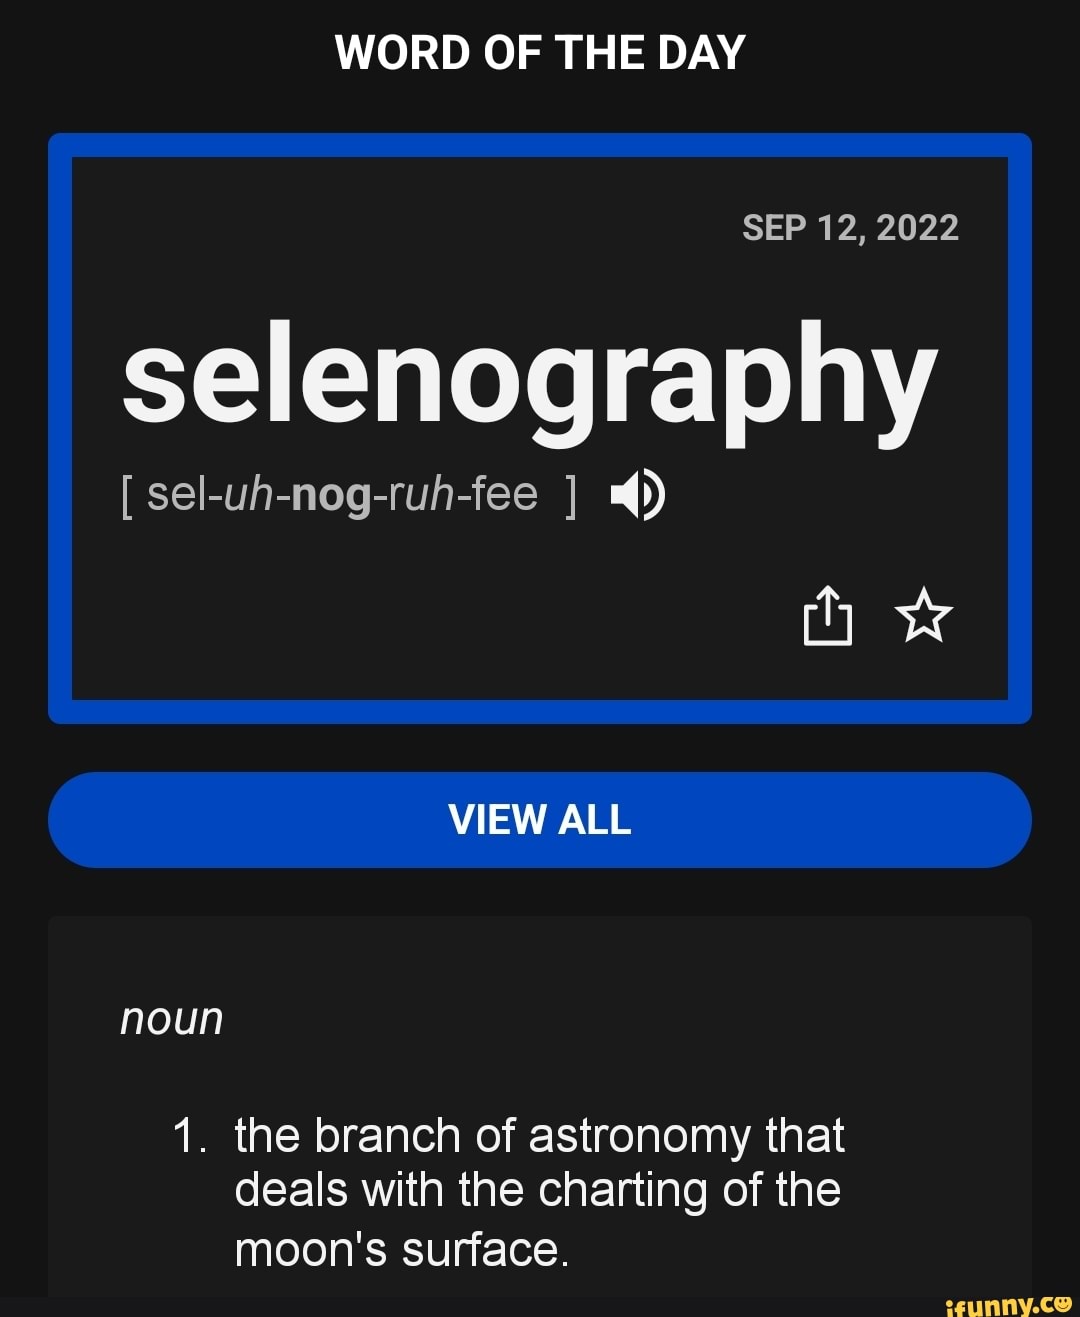 SS WORD OF THE DAY [ sel-uh-nog-ruh-fee J noun VIEW ALL SEP 12, 2022 ww ...